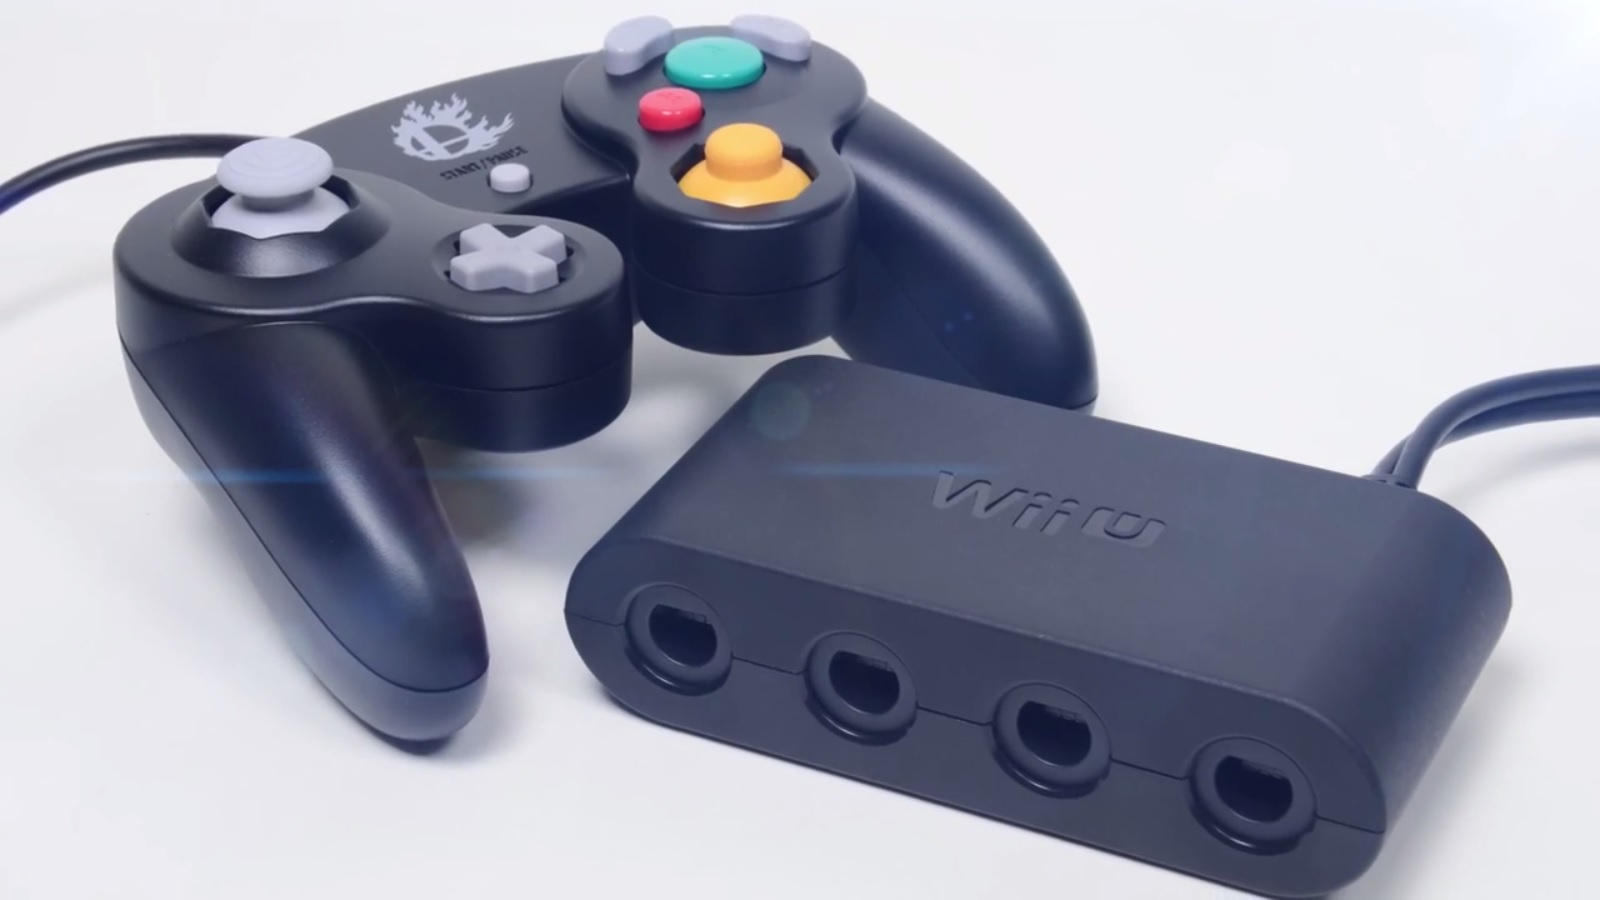 4.0.0 update now allows for controller support with Wii U GameCube